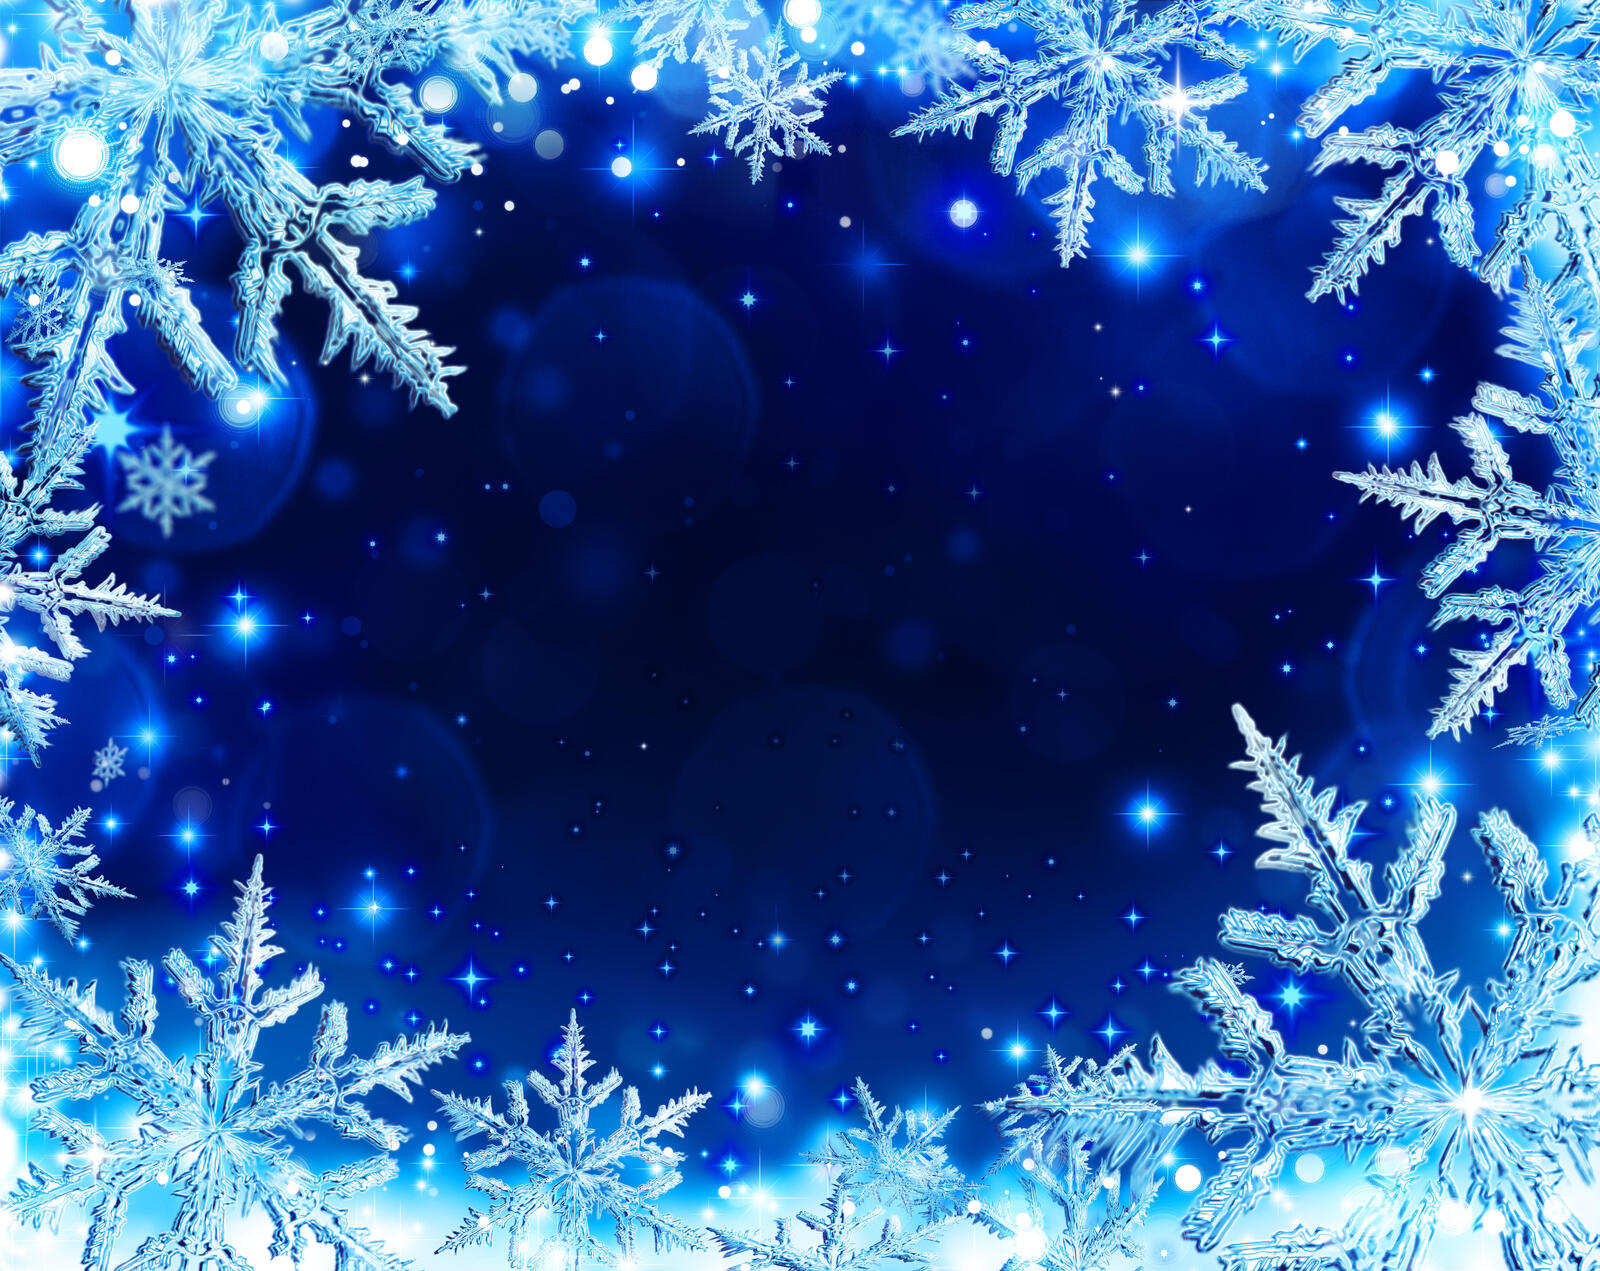 Wallpapers background snowflakes Christmas on the desktop